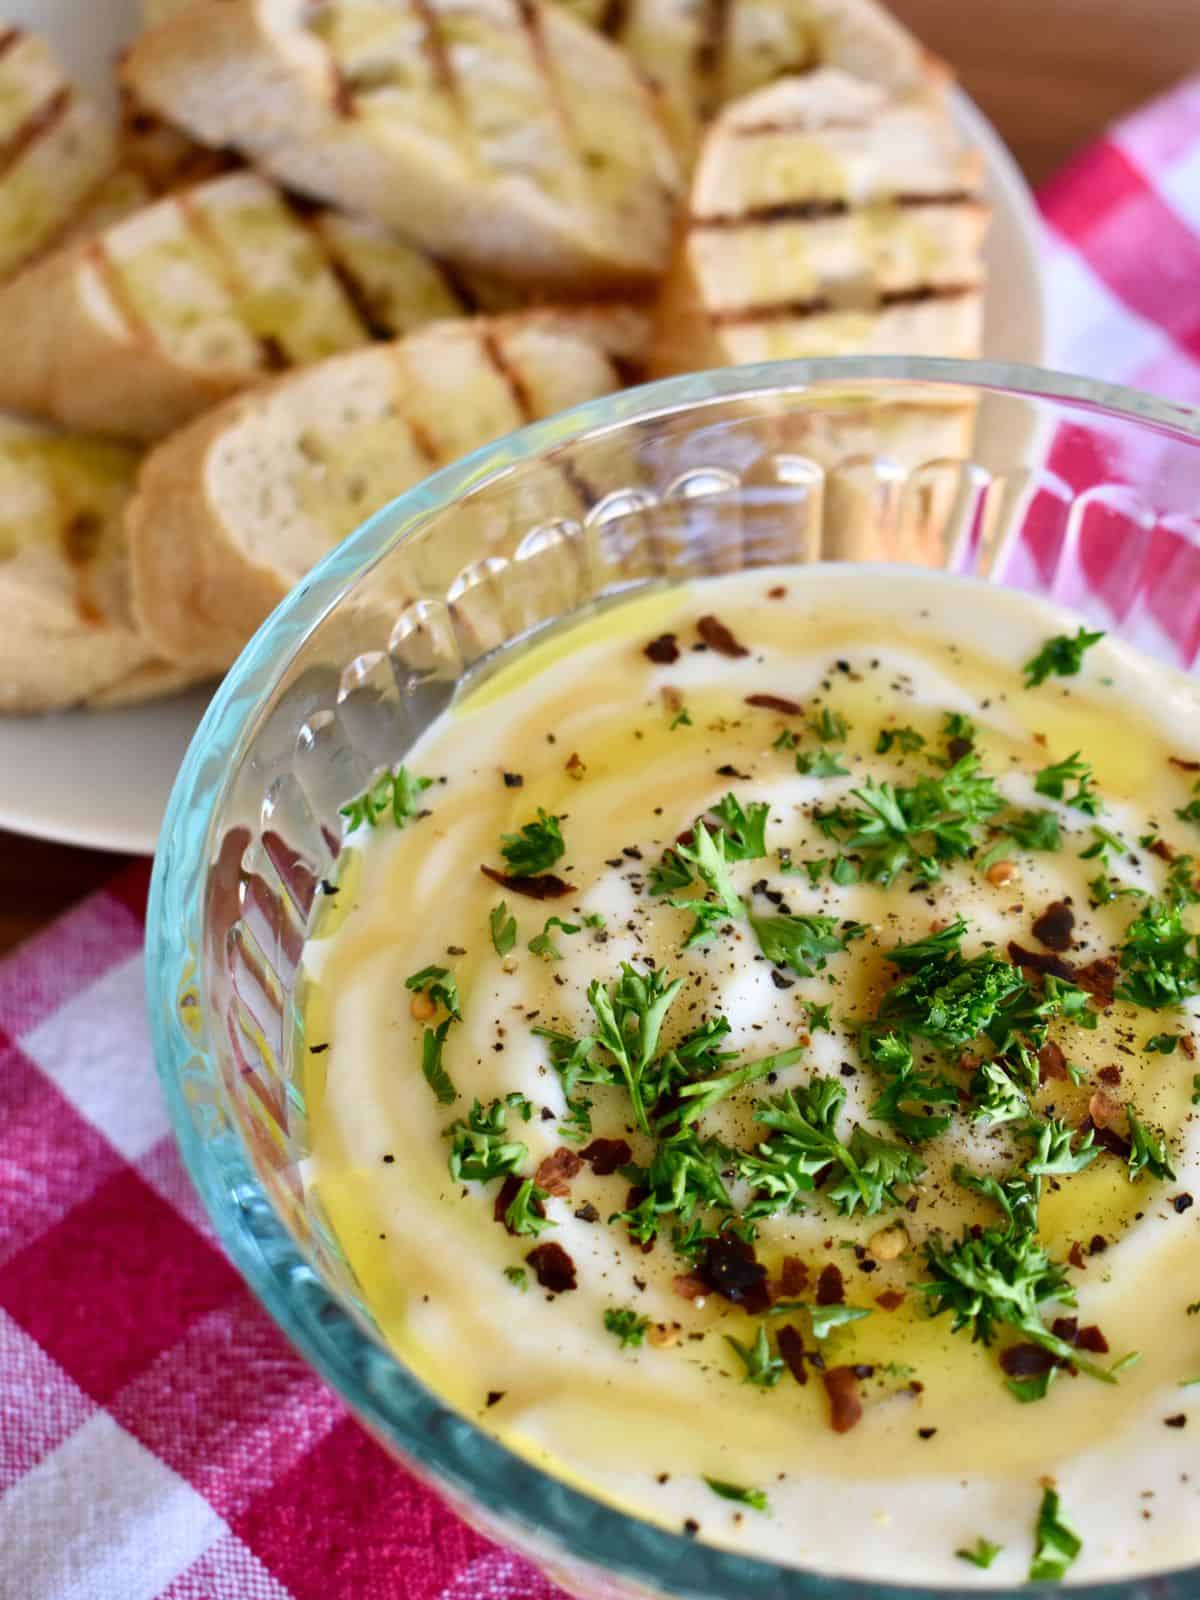 Whipped ricotta dip in a glass bowl with grilled baguettes. 